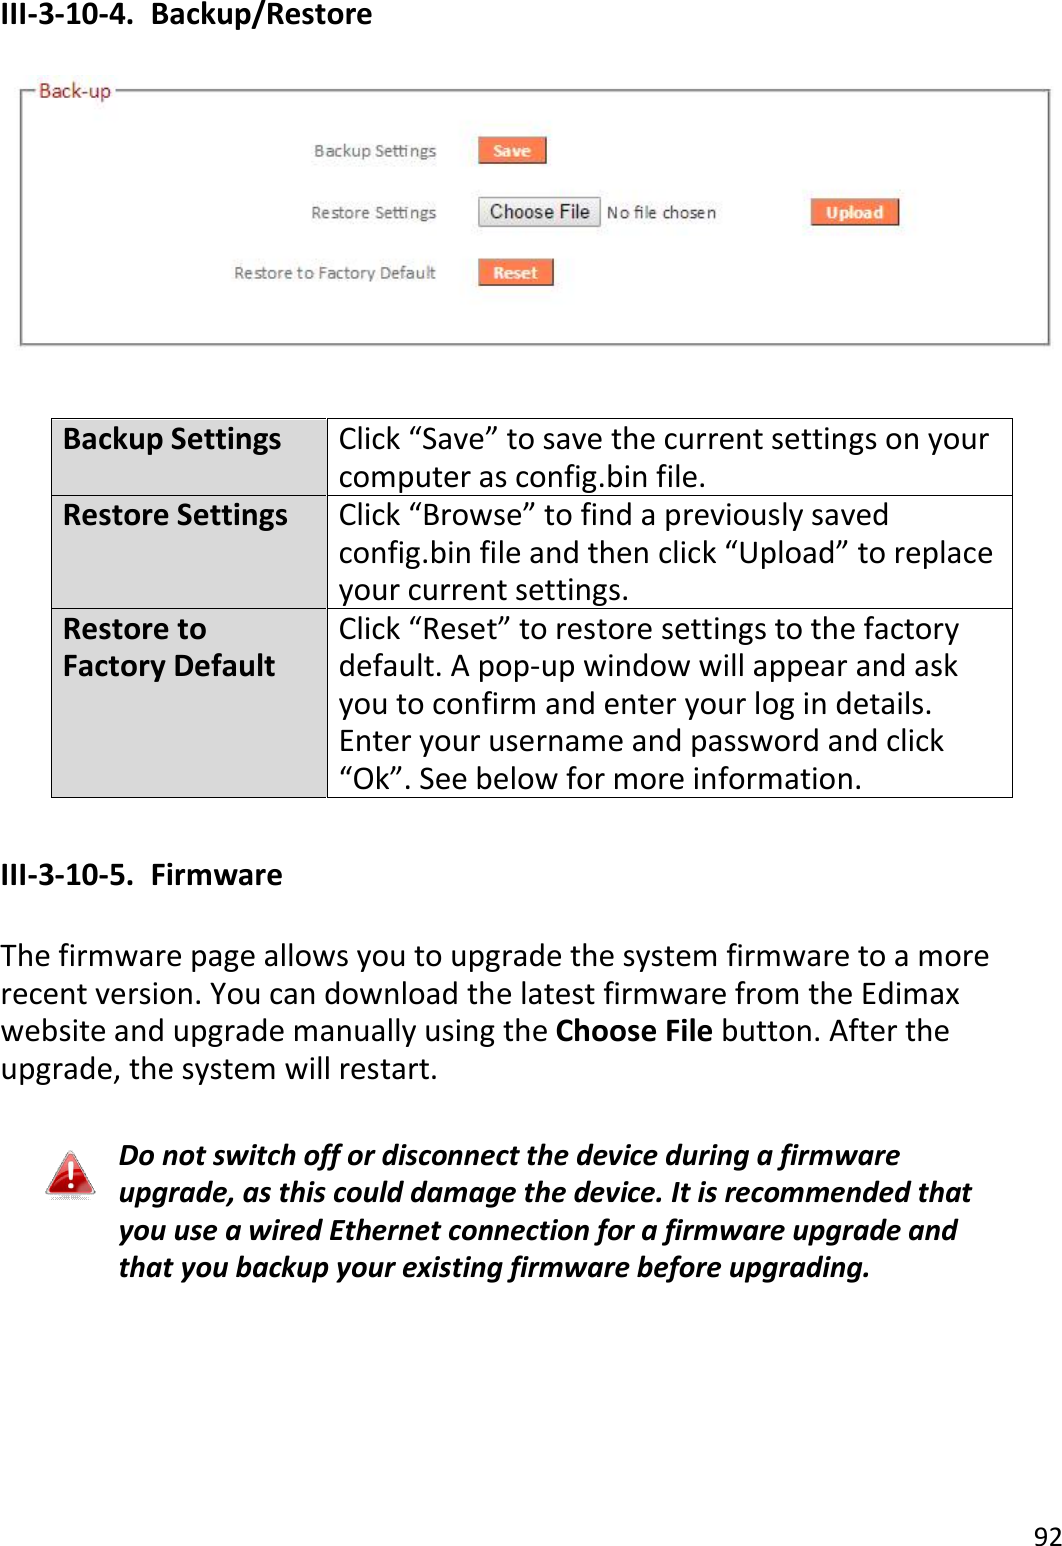 92  III-3-10-4.  Backup/Restore    Backup Settings Click “Save” to save the current settings on your computer as config.bin file. Restore Settings Click “Browse” to find a previously saved config.bin file and then click “Upload” to replace your current settings. Restore to Factory Default Click “Reset” to restore settings to the factory default. A pop-up window will appear and ask you to confirm and enter your log in details. Enter your username and password and click “Ok”. See below for more information.  III-3-10-5.  Firmware  The firmware page allows you to upgrade the system firmware to a more recent version. You can download the latest firmware from the Edimax website and upgrade manually using the Choose File button. After the upgrade, the system will restart.  Do not switch off or disconnect the device during a firmware upgrade, as this could damage the device. It is recommended that you use a wired Ethernet connection for a firmware upgrade and that you backup your existing firmware before upgrading.  